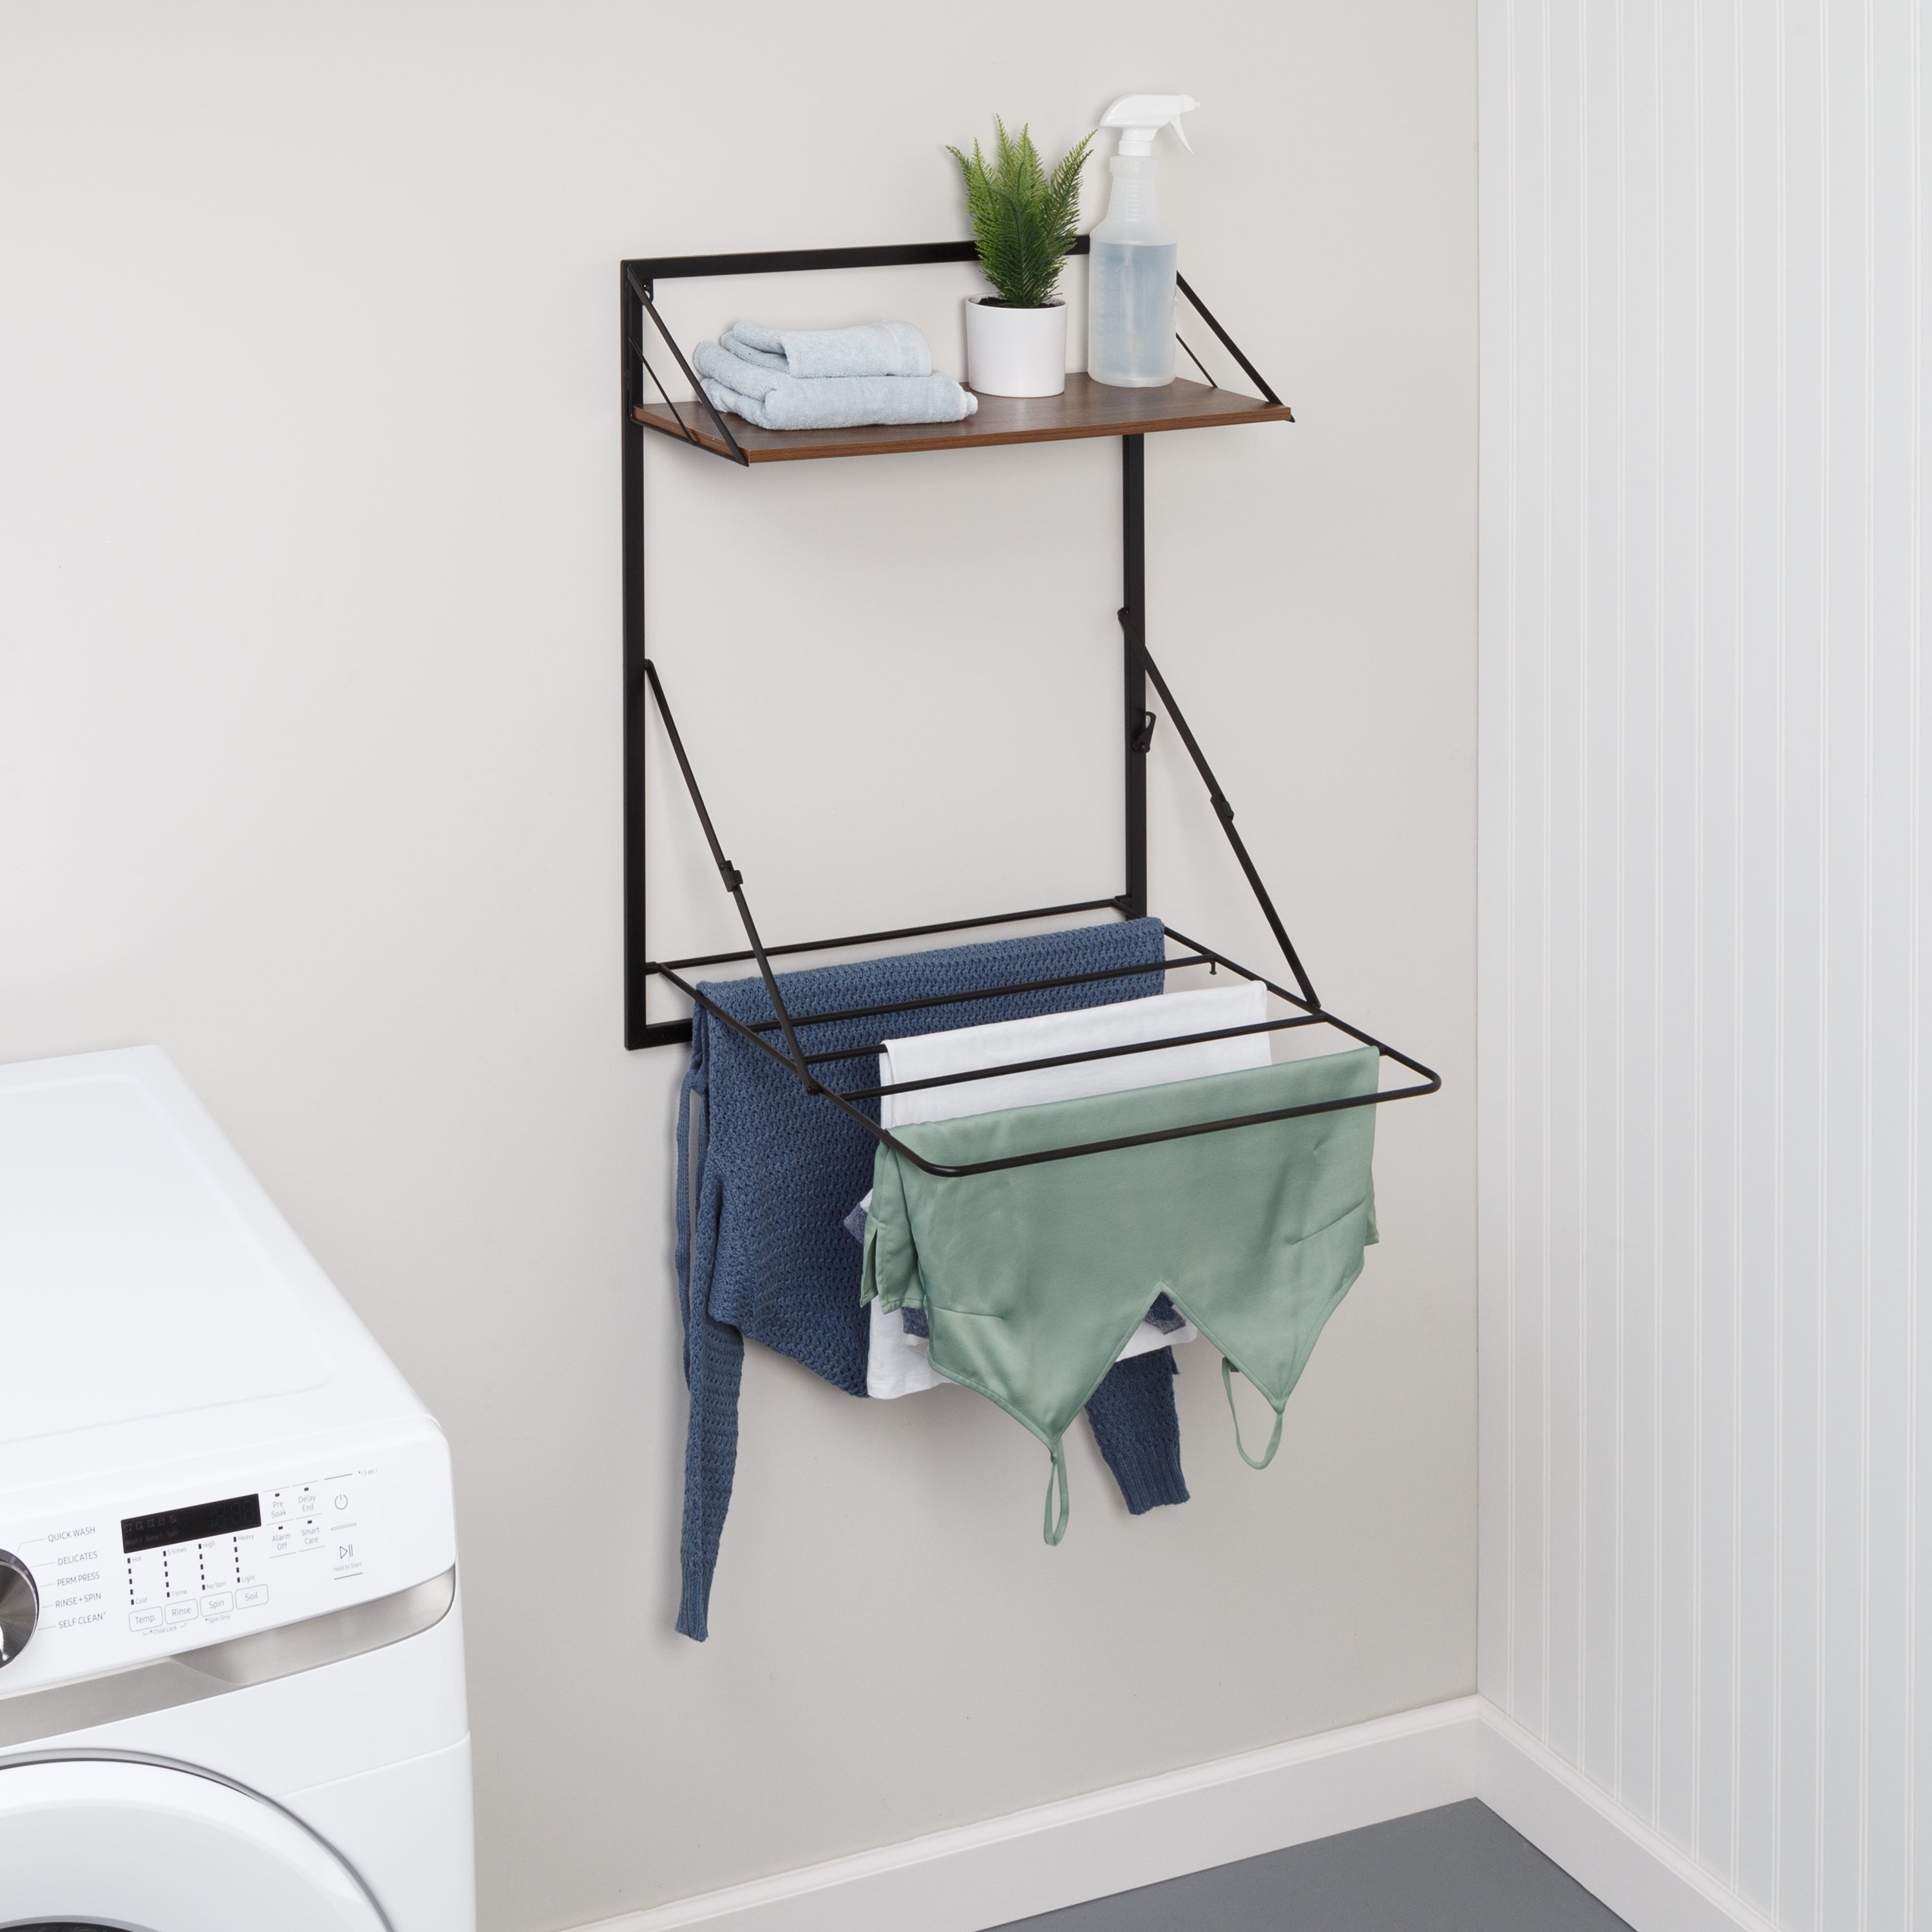 Folding Laundry Drying Rack Wall-mount Foldable Clothes Dryer Hanger Storage